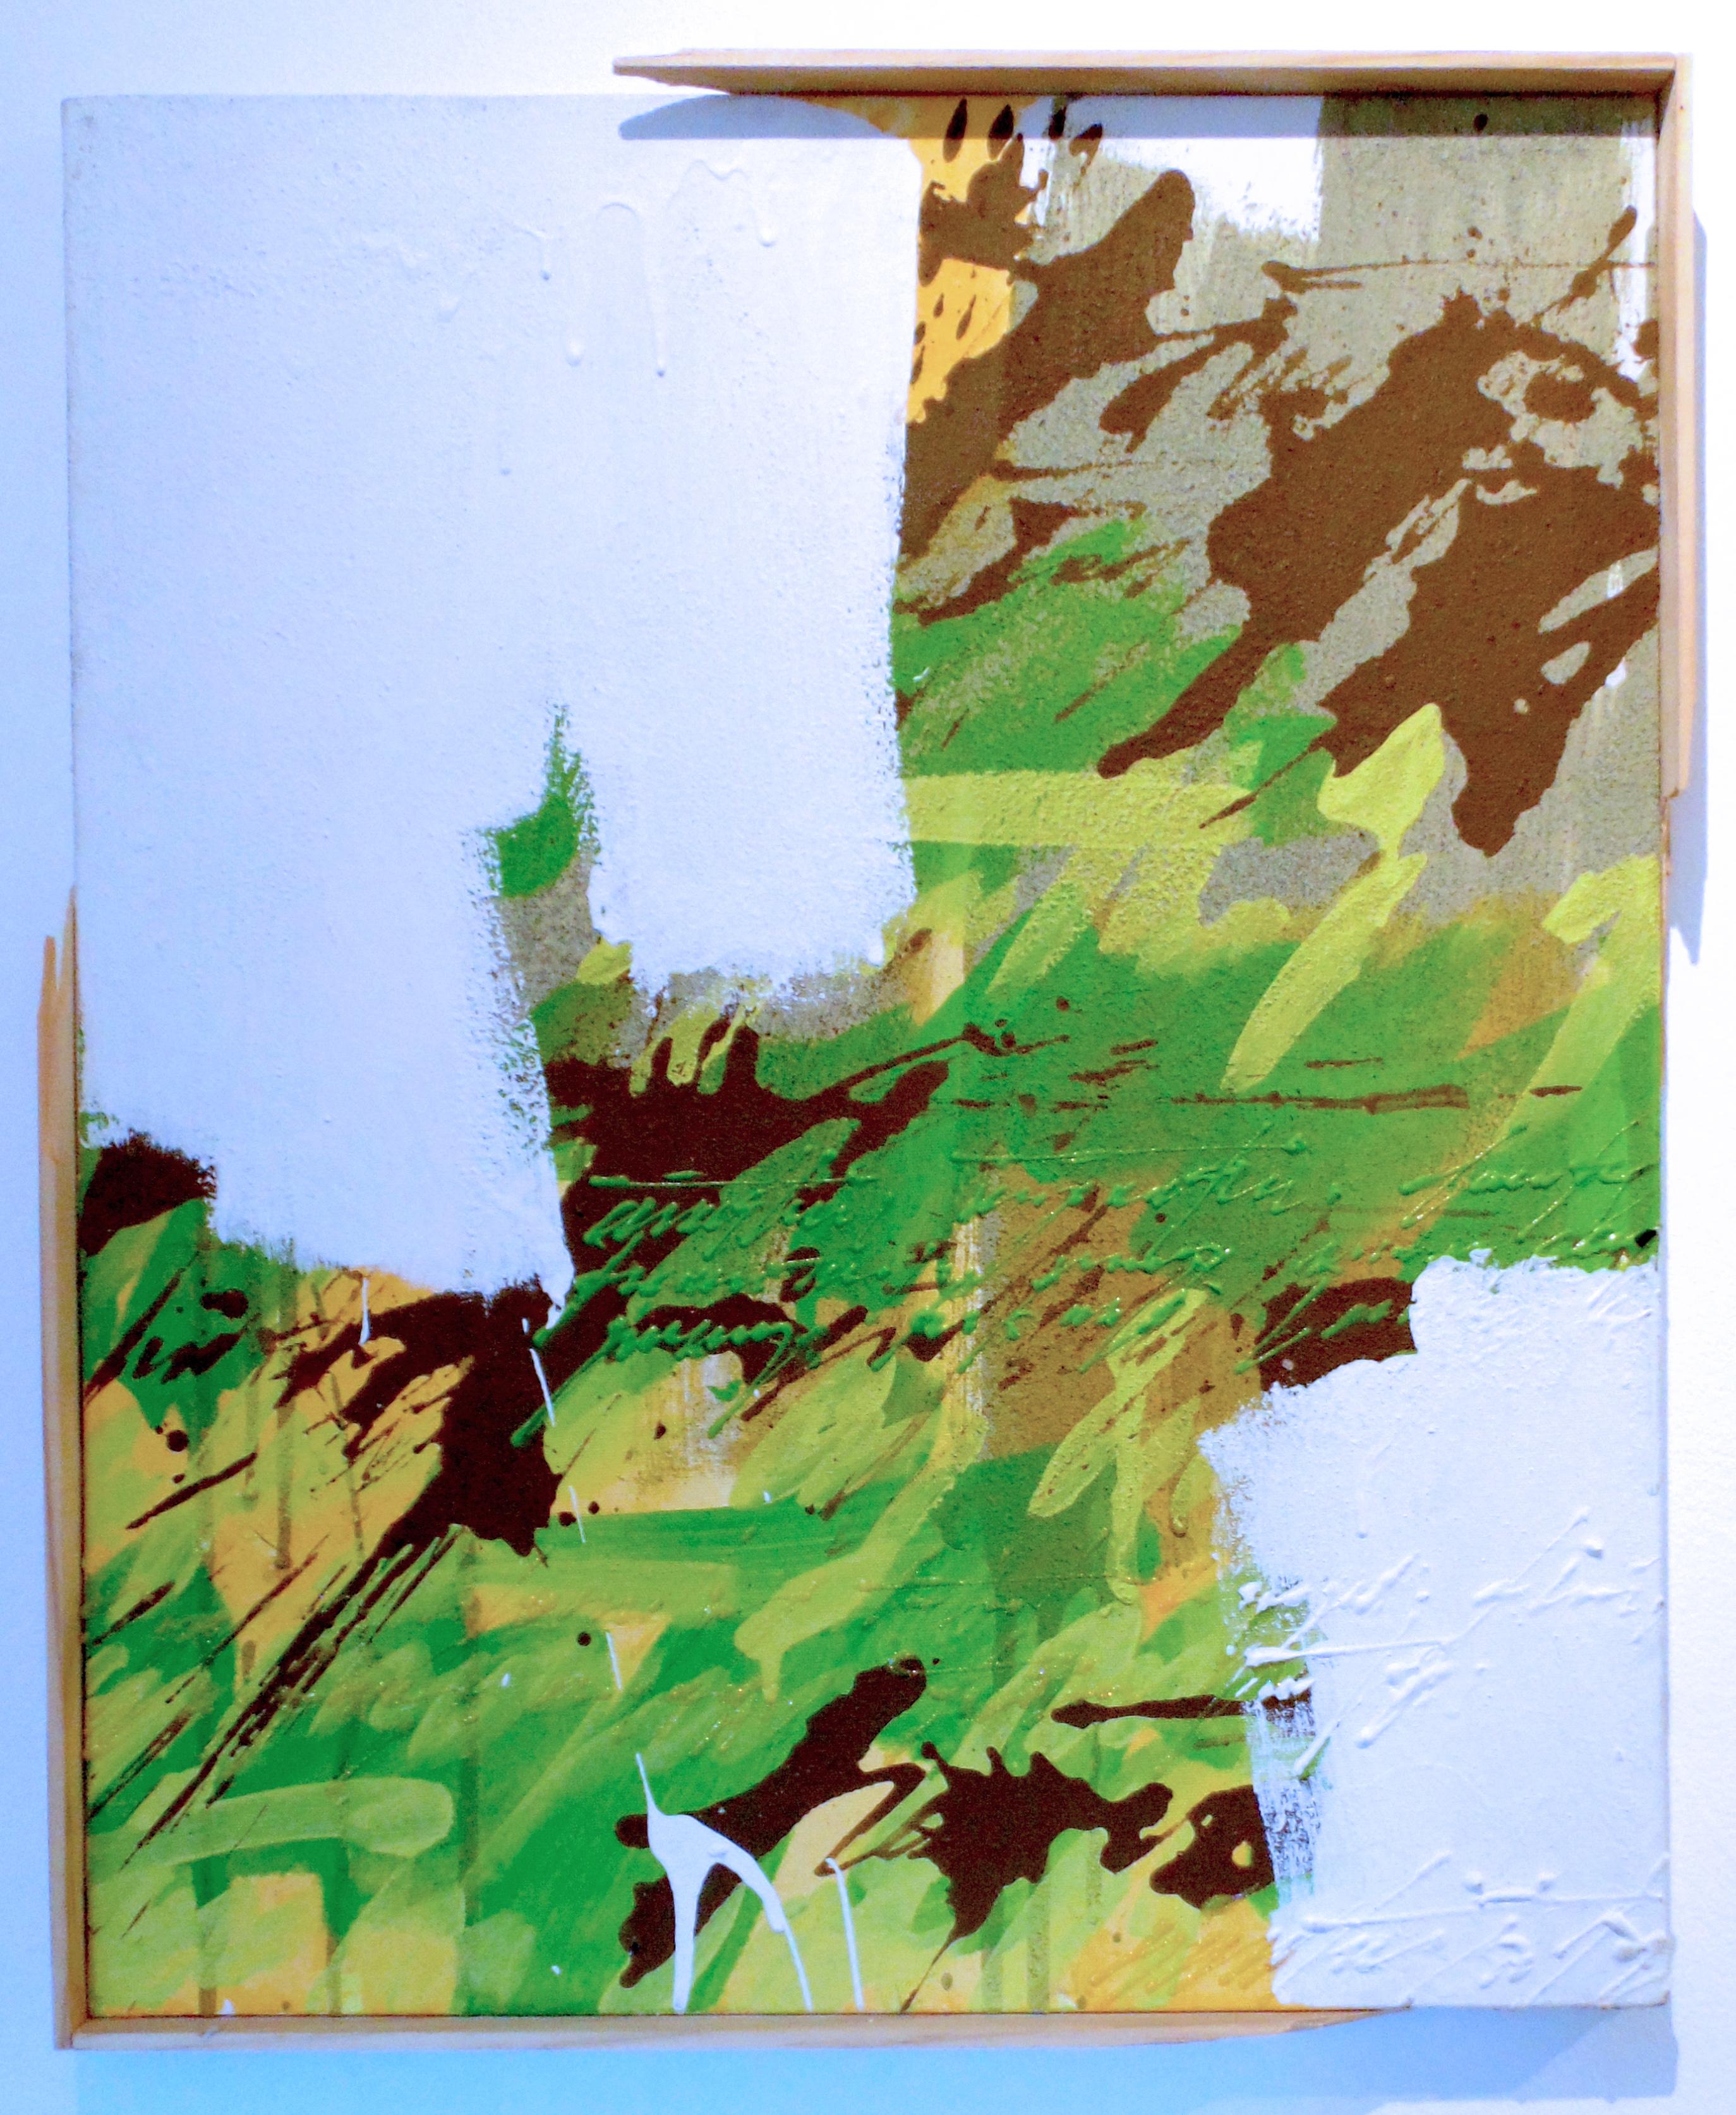 Negative(s) Pace, 2012, graffiti, street art, green, text, abstract, brown - Painting by Unknown